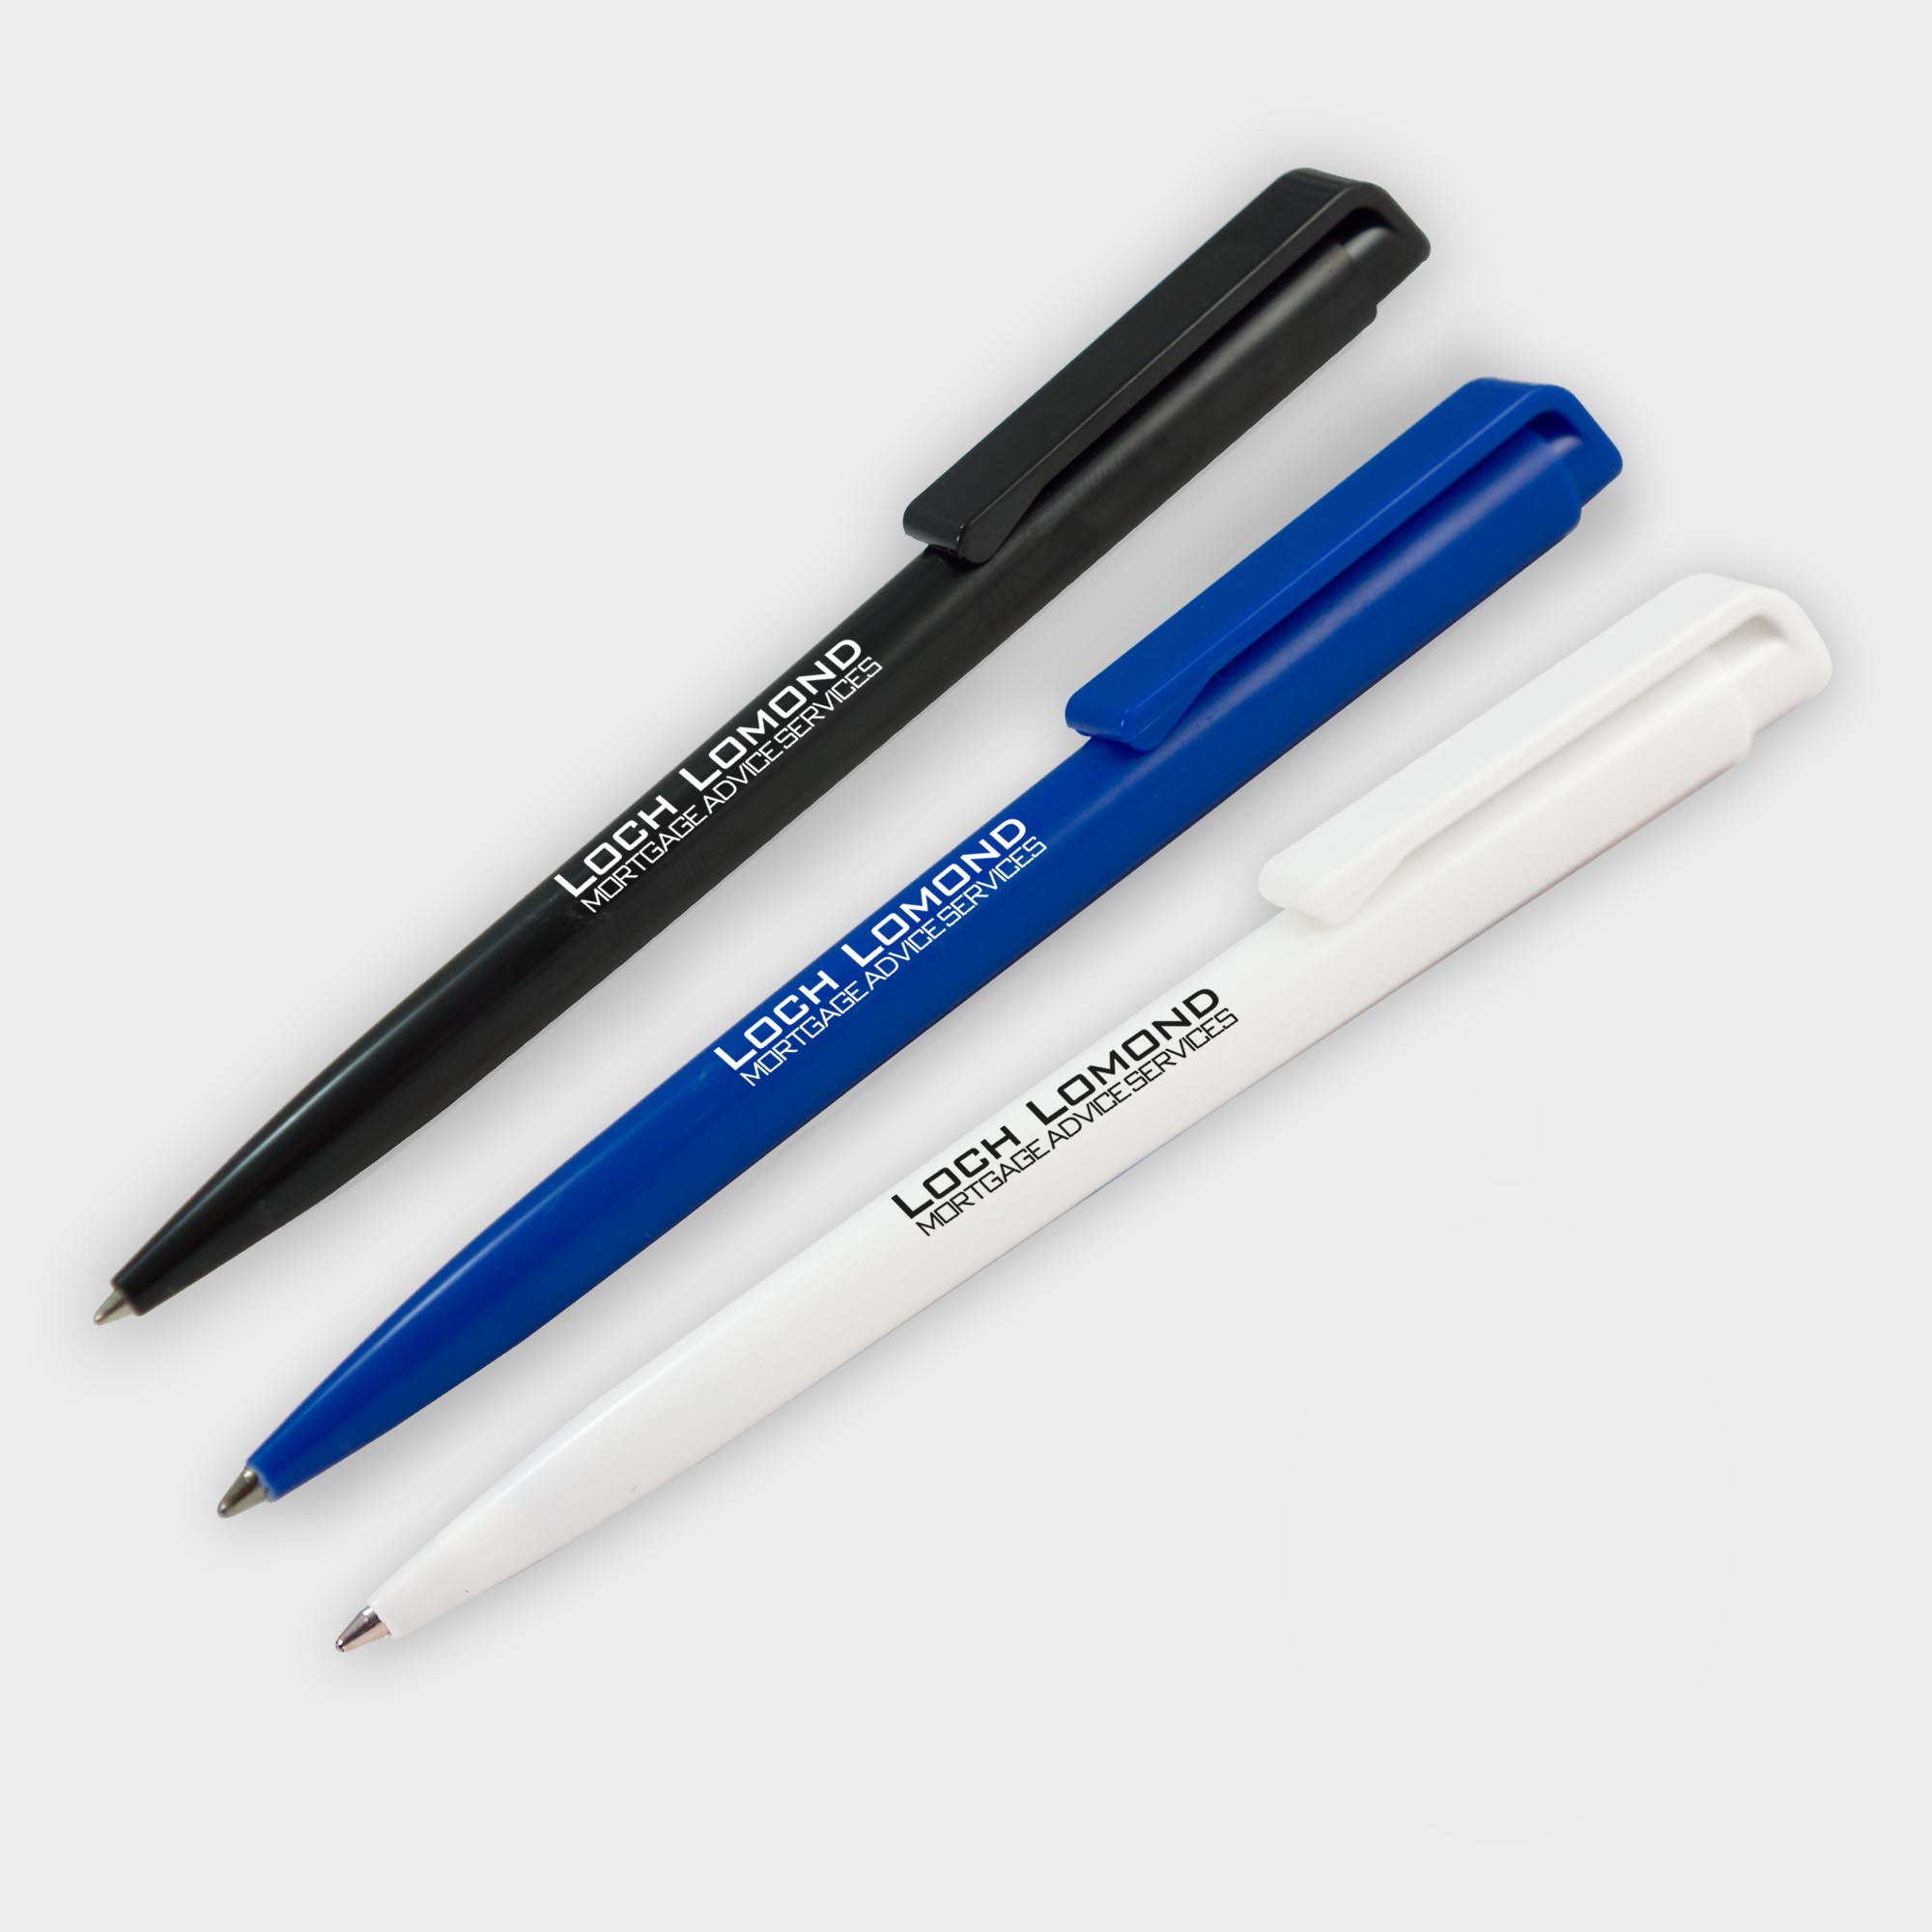 The Green & Good Sky Pen made from recycled CD cases. Twist action retractable pen, available in a variety of colours. Budget option for the price-conscious customer. Black ink as standard.